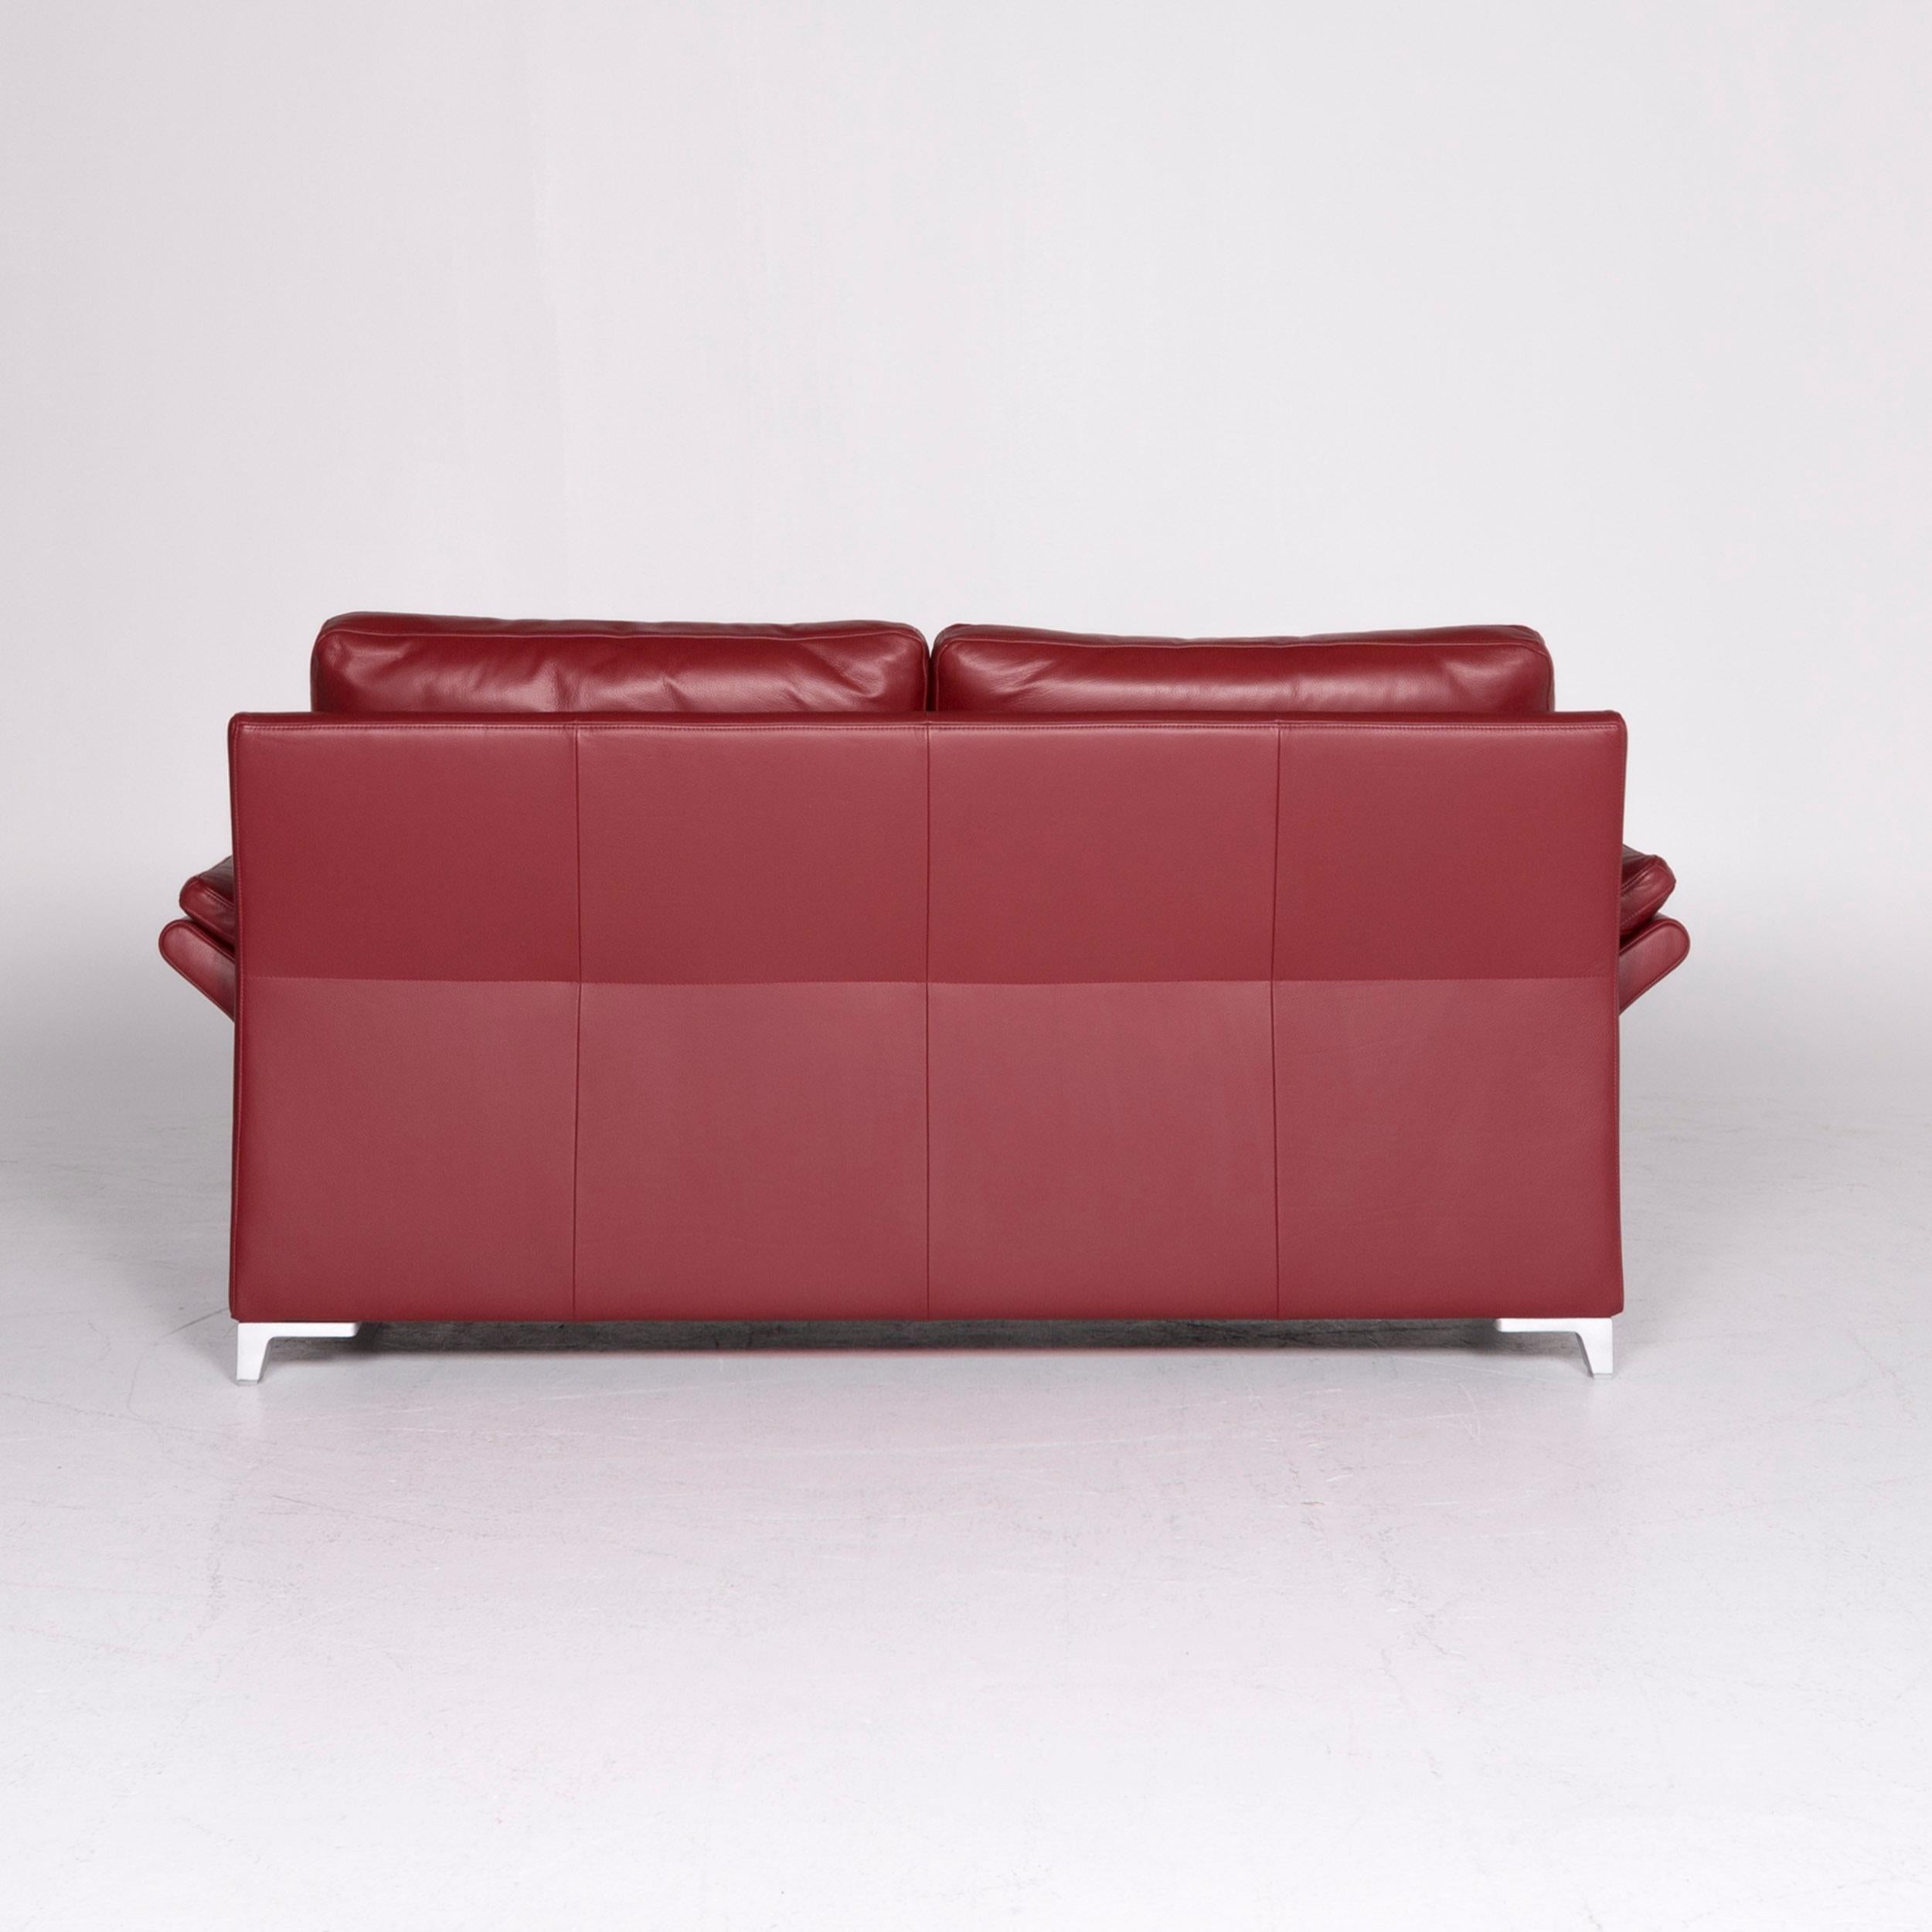 Rolf Benz 3300 Designer Leather Sofa Red Genuine Leather Two-Seat Couch 3